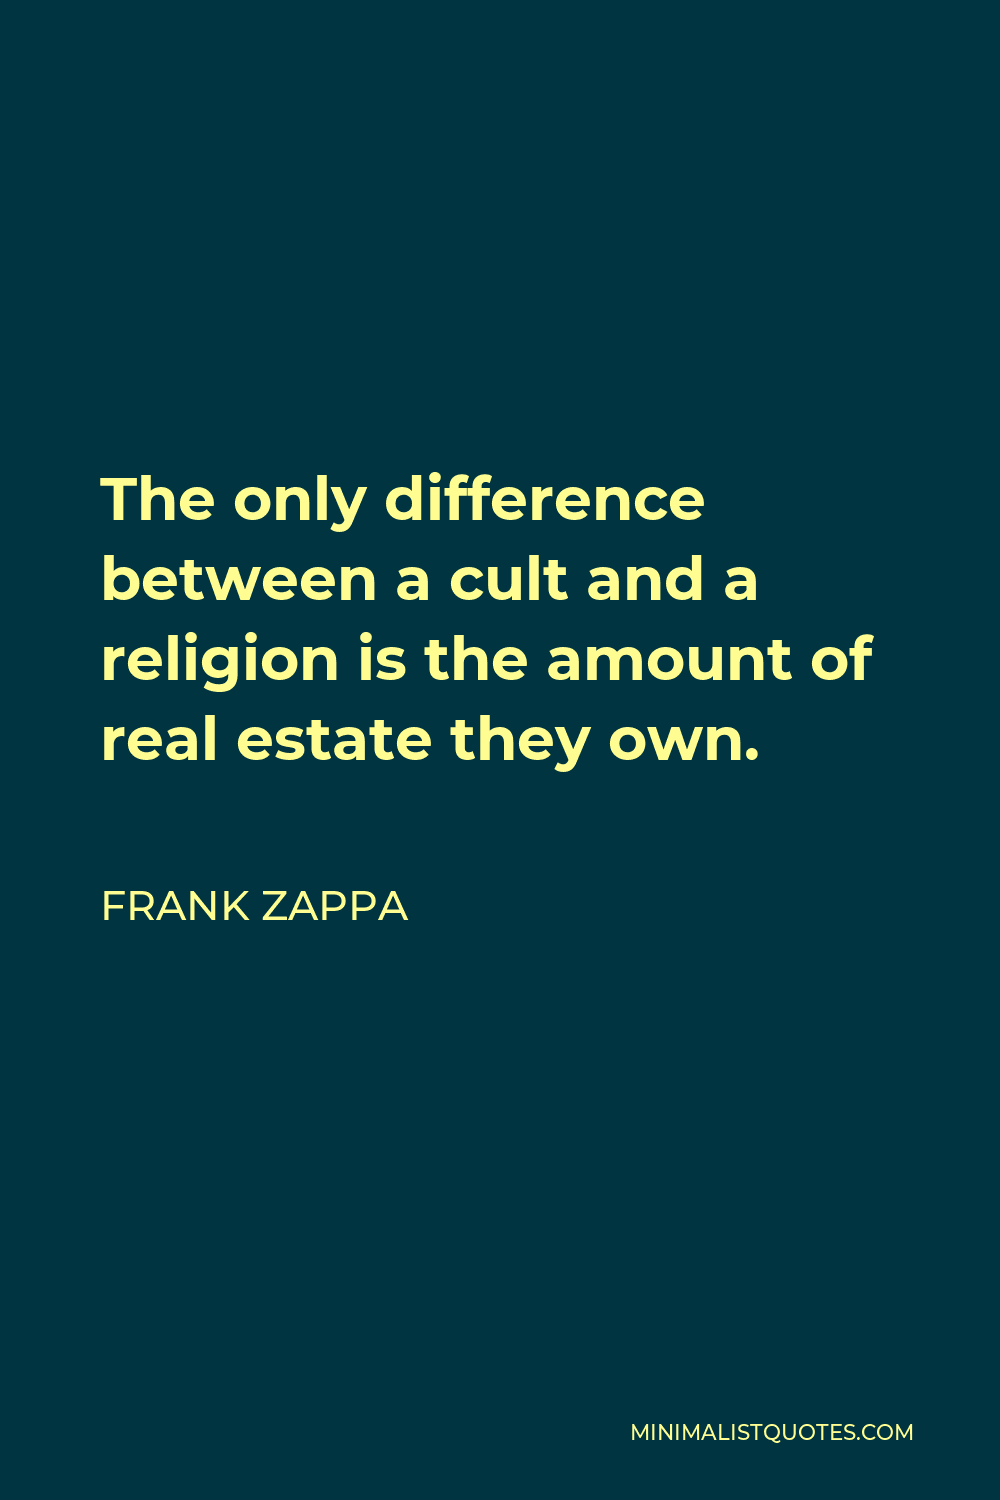 Frank Zappa Quote - The only difference between a cult and a religion is the amount of real estate they own.